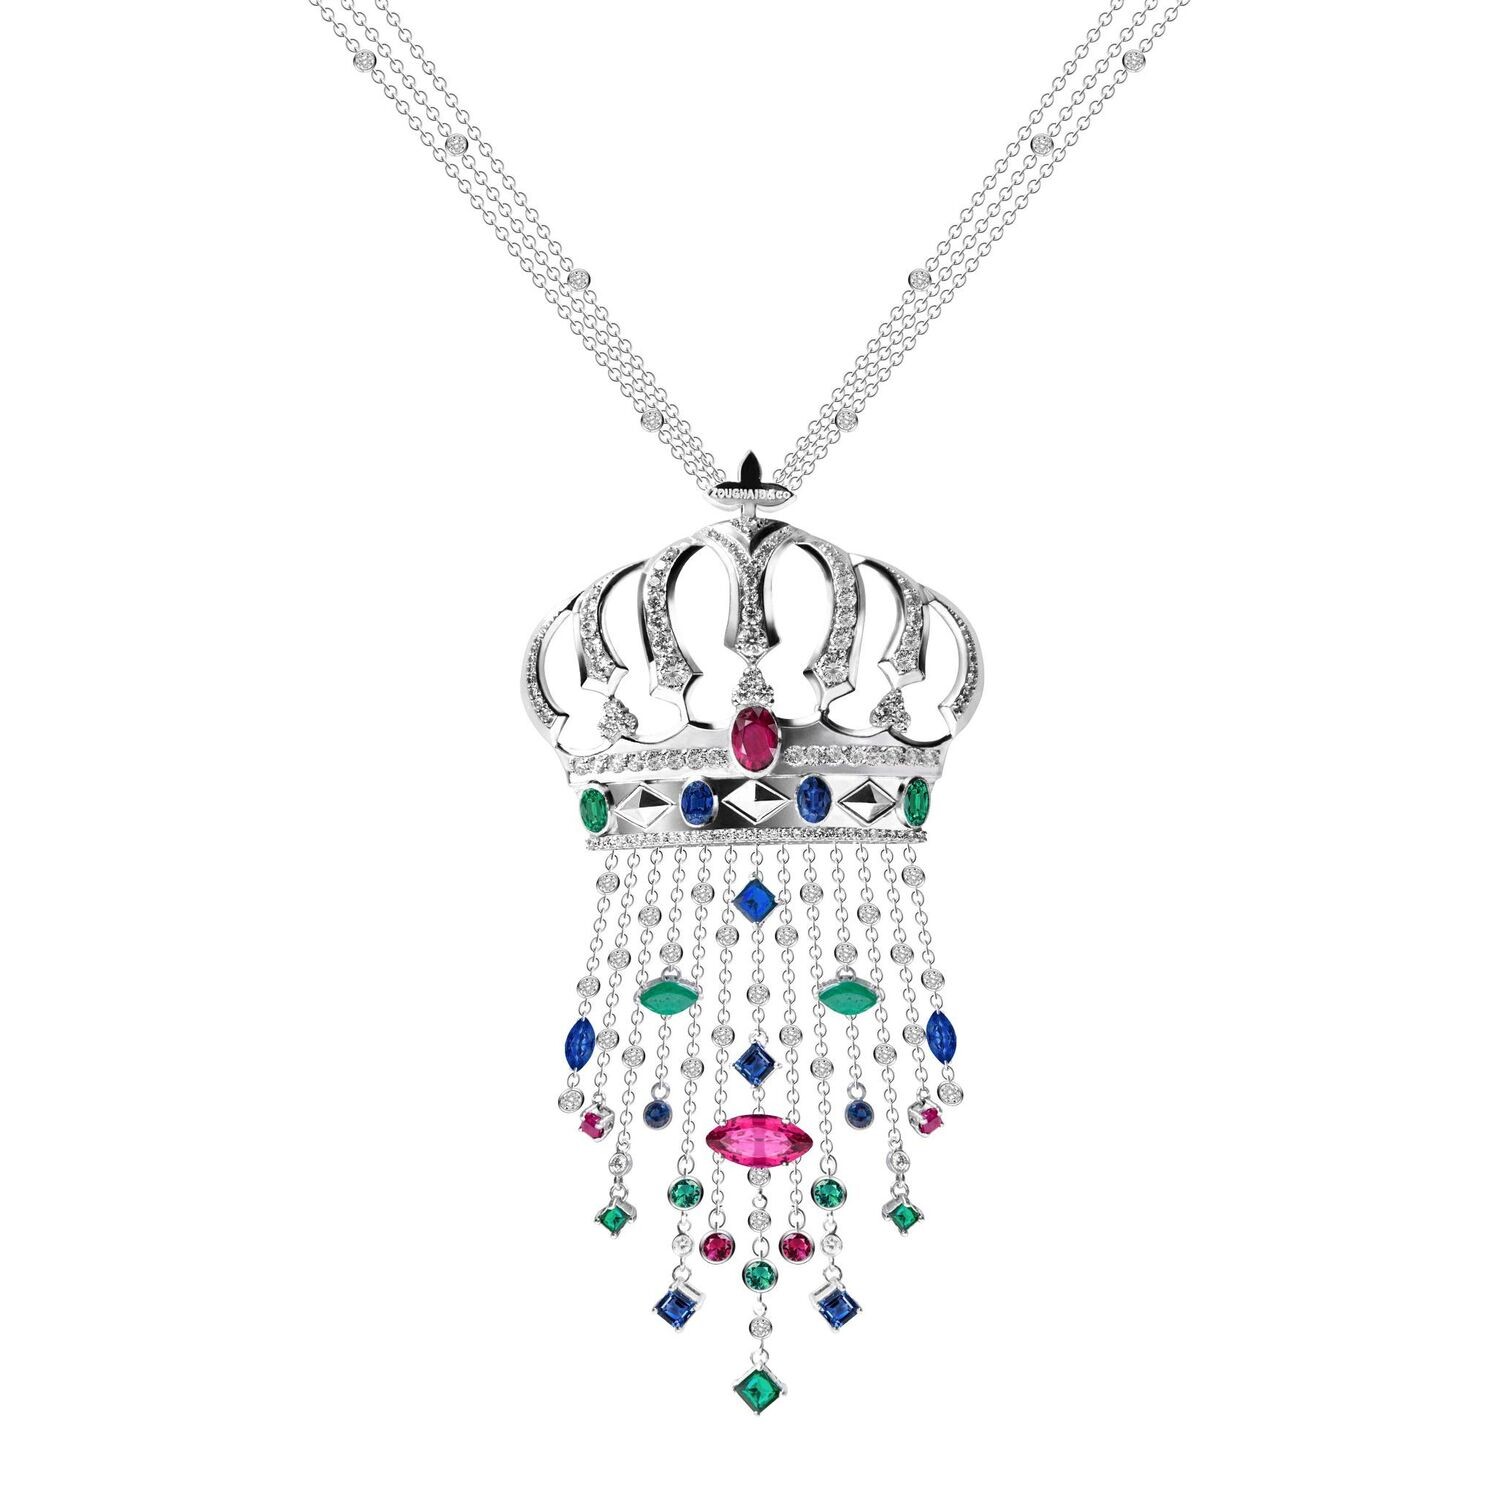 Crown Diamond Necklace with Ruby, Sapphire and Emerald